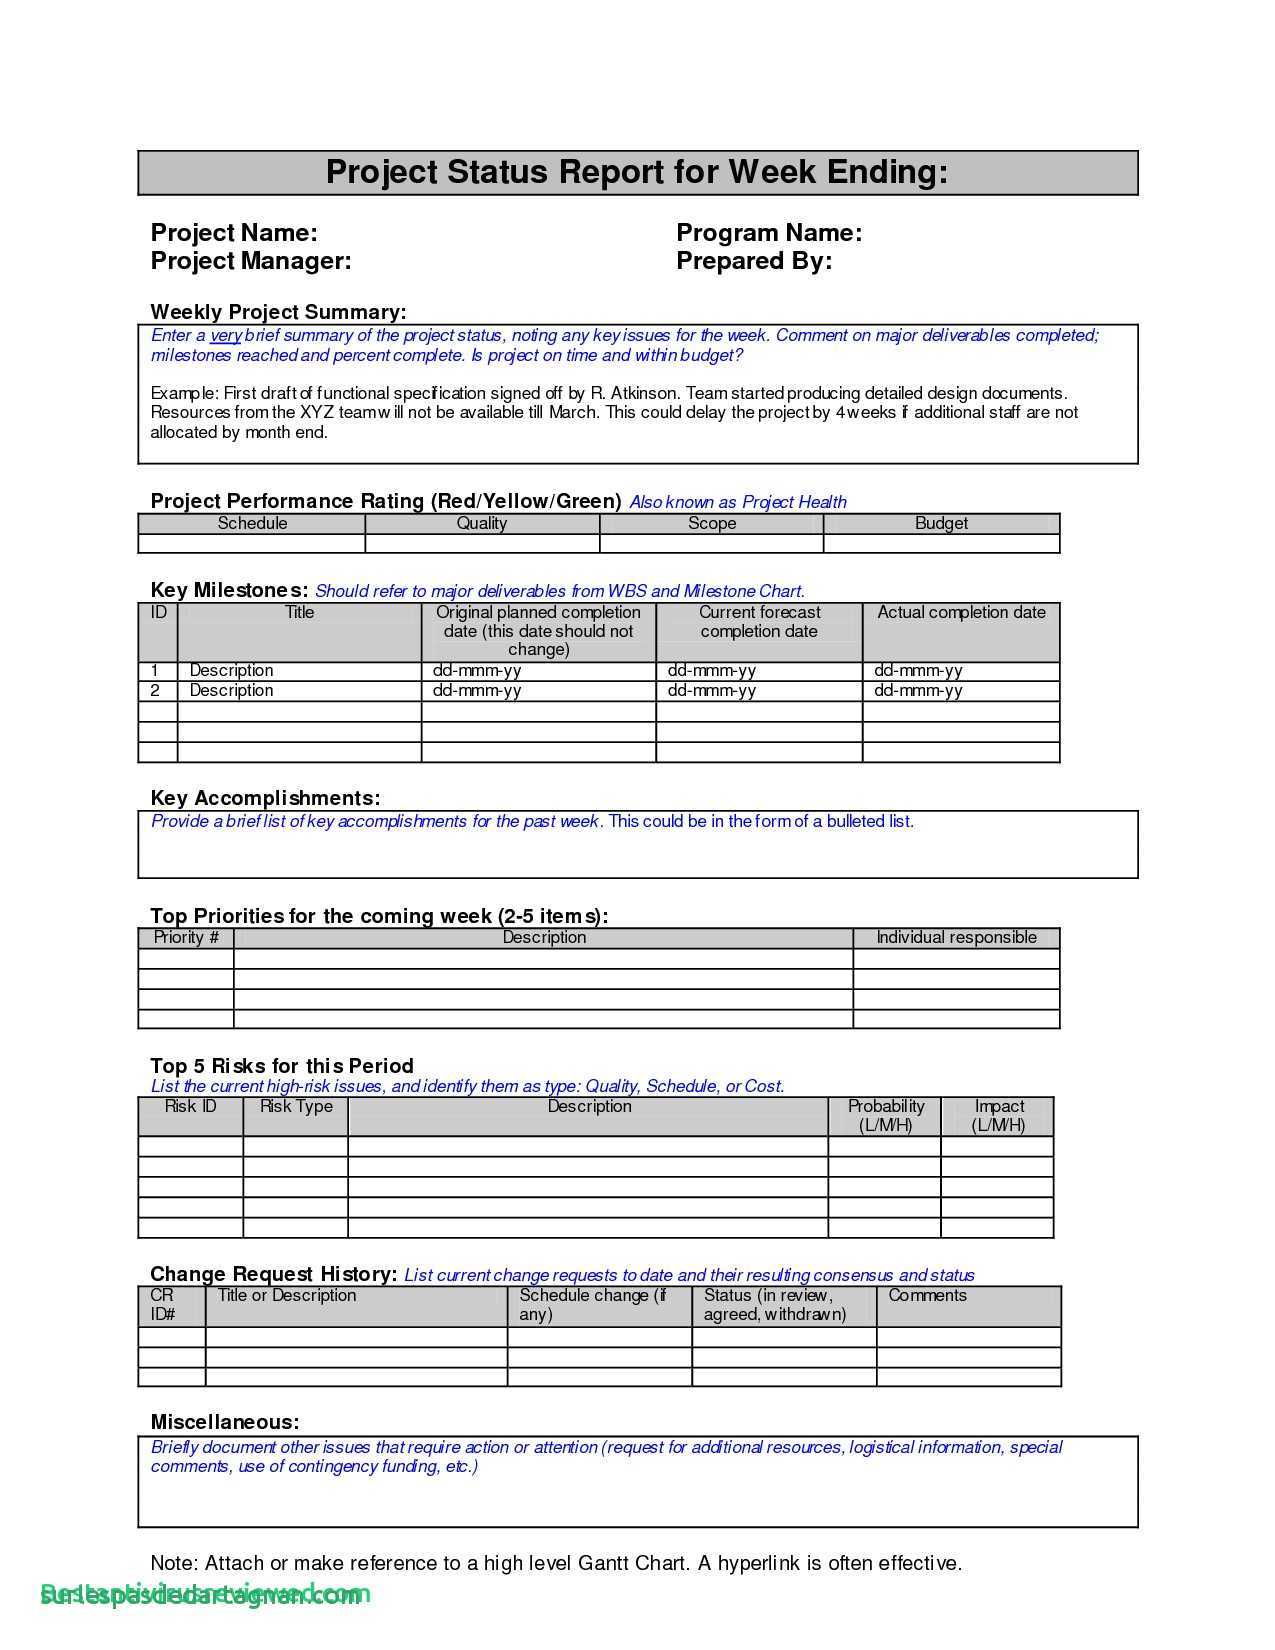 12 Conflict Minerals Reporting Template Example | Radaircars Inside Conflict Minerals Reporting Template